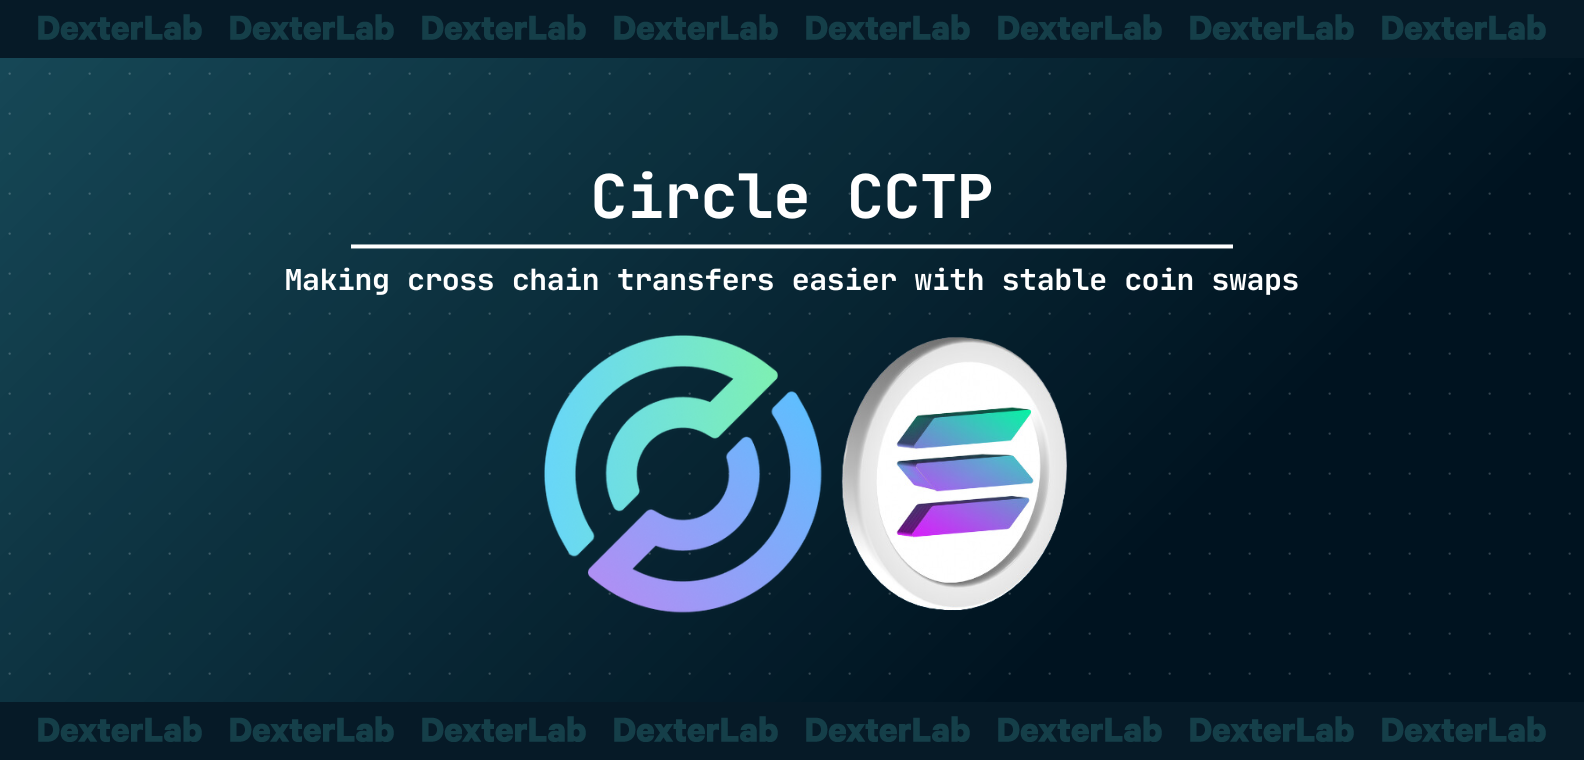 Circle CCTP: making cross-chain transfers easier with stablecoin swaps